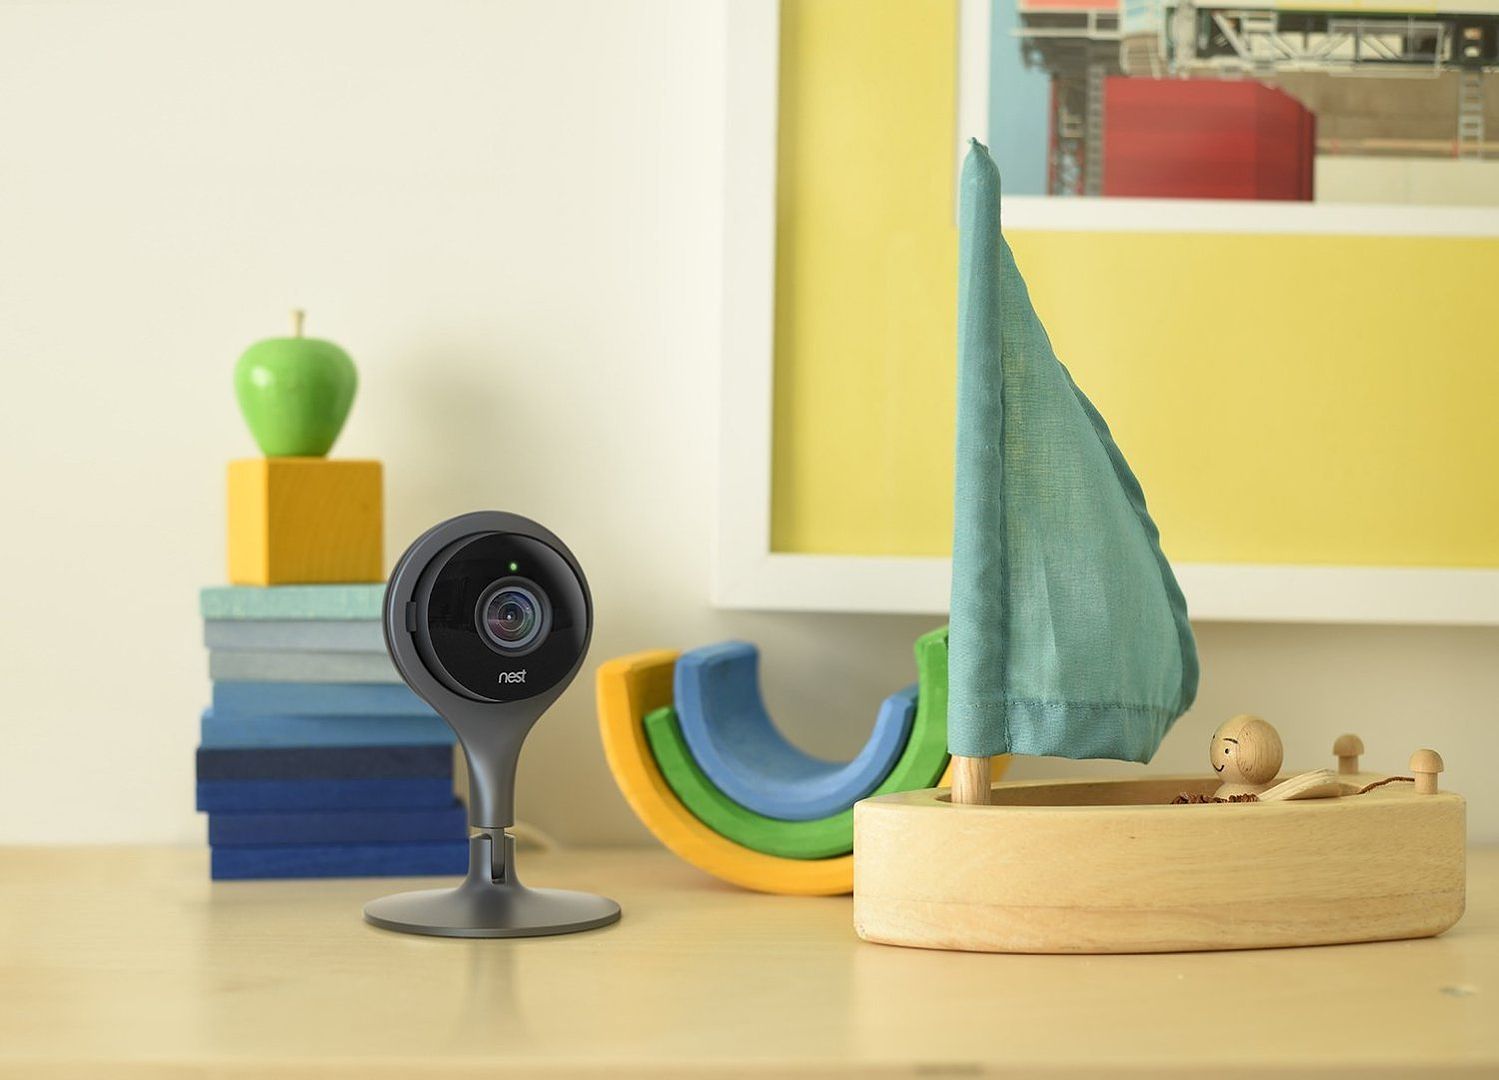 The new Nestcam Security camera from Nest: Great choice for a safe, password-protected monitor